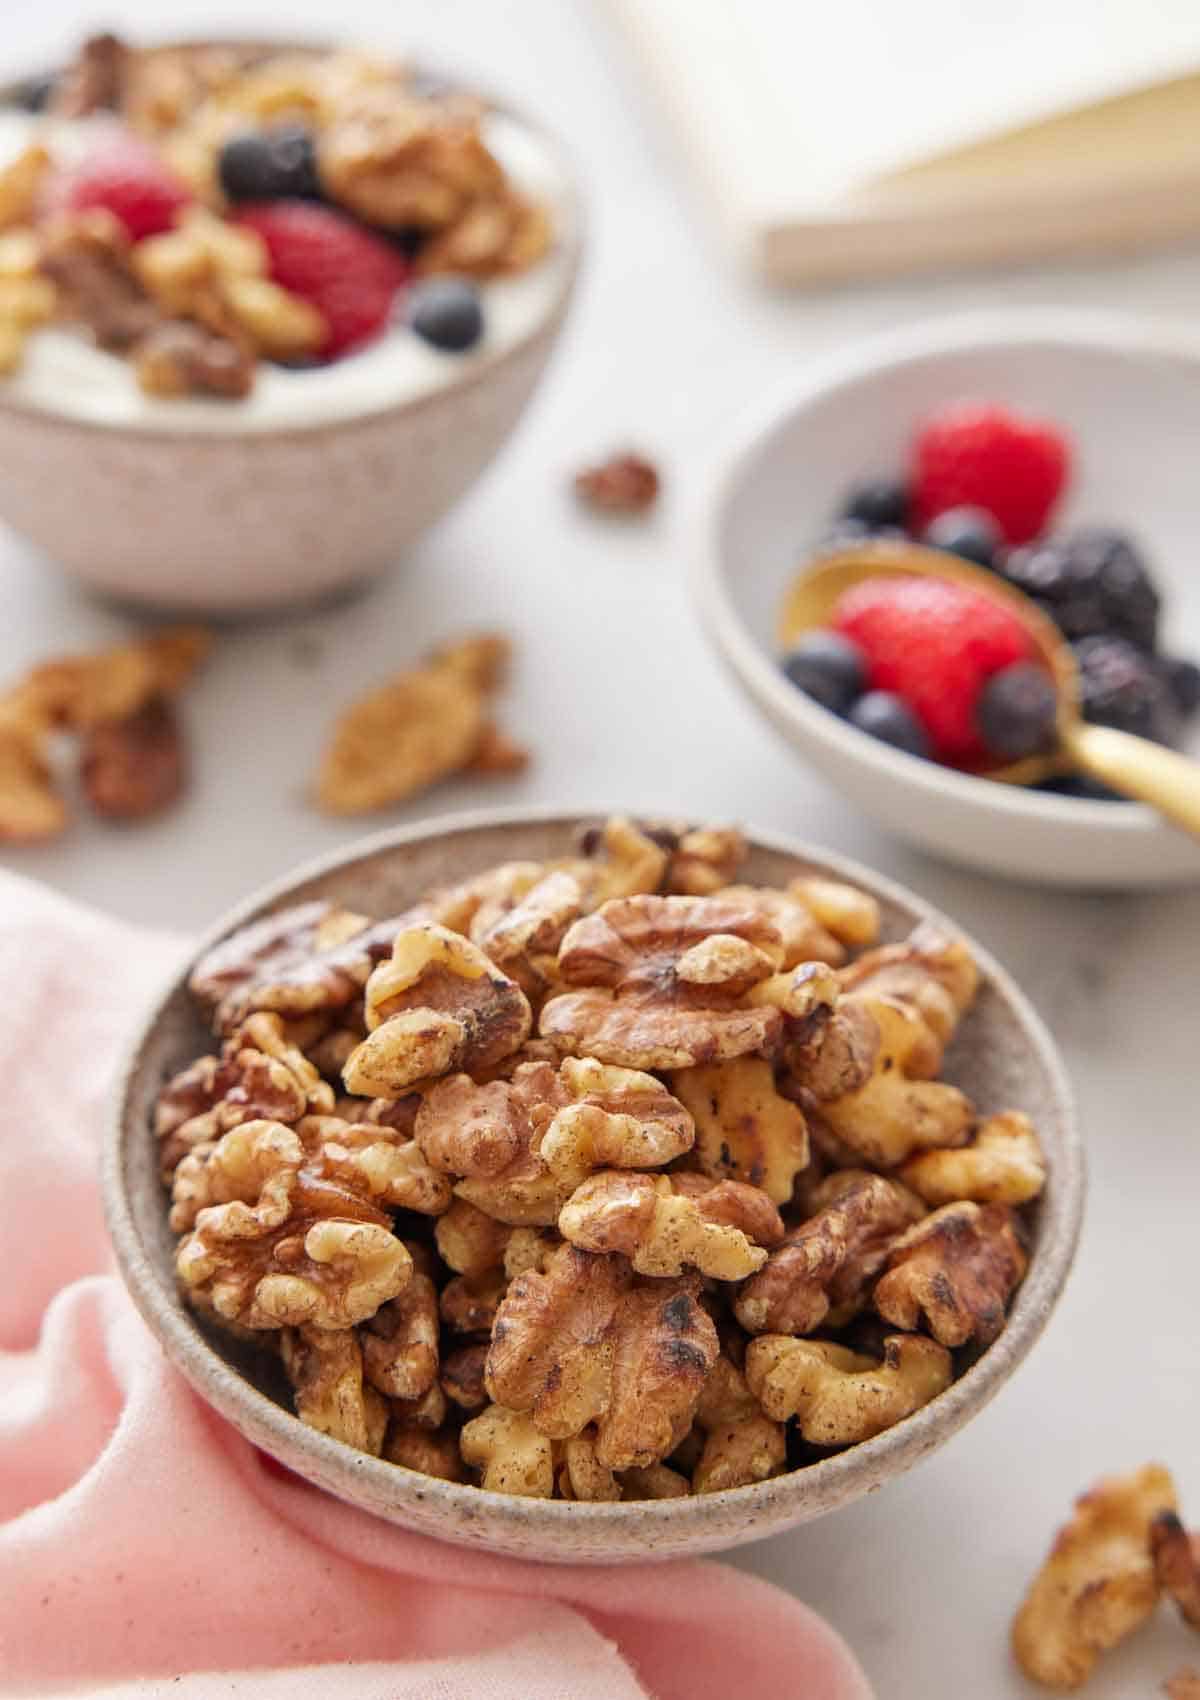 A bowl of toasted walnuts with some berries in the background along with a bowl of yogurt with toasted walnuts and berries.